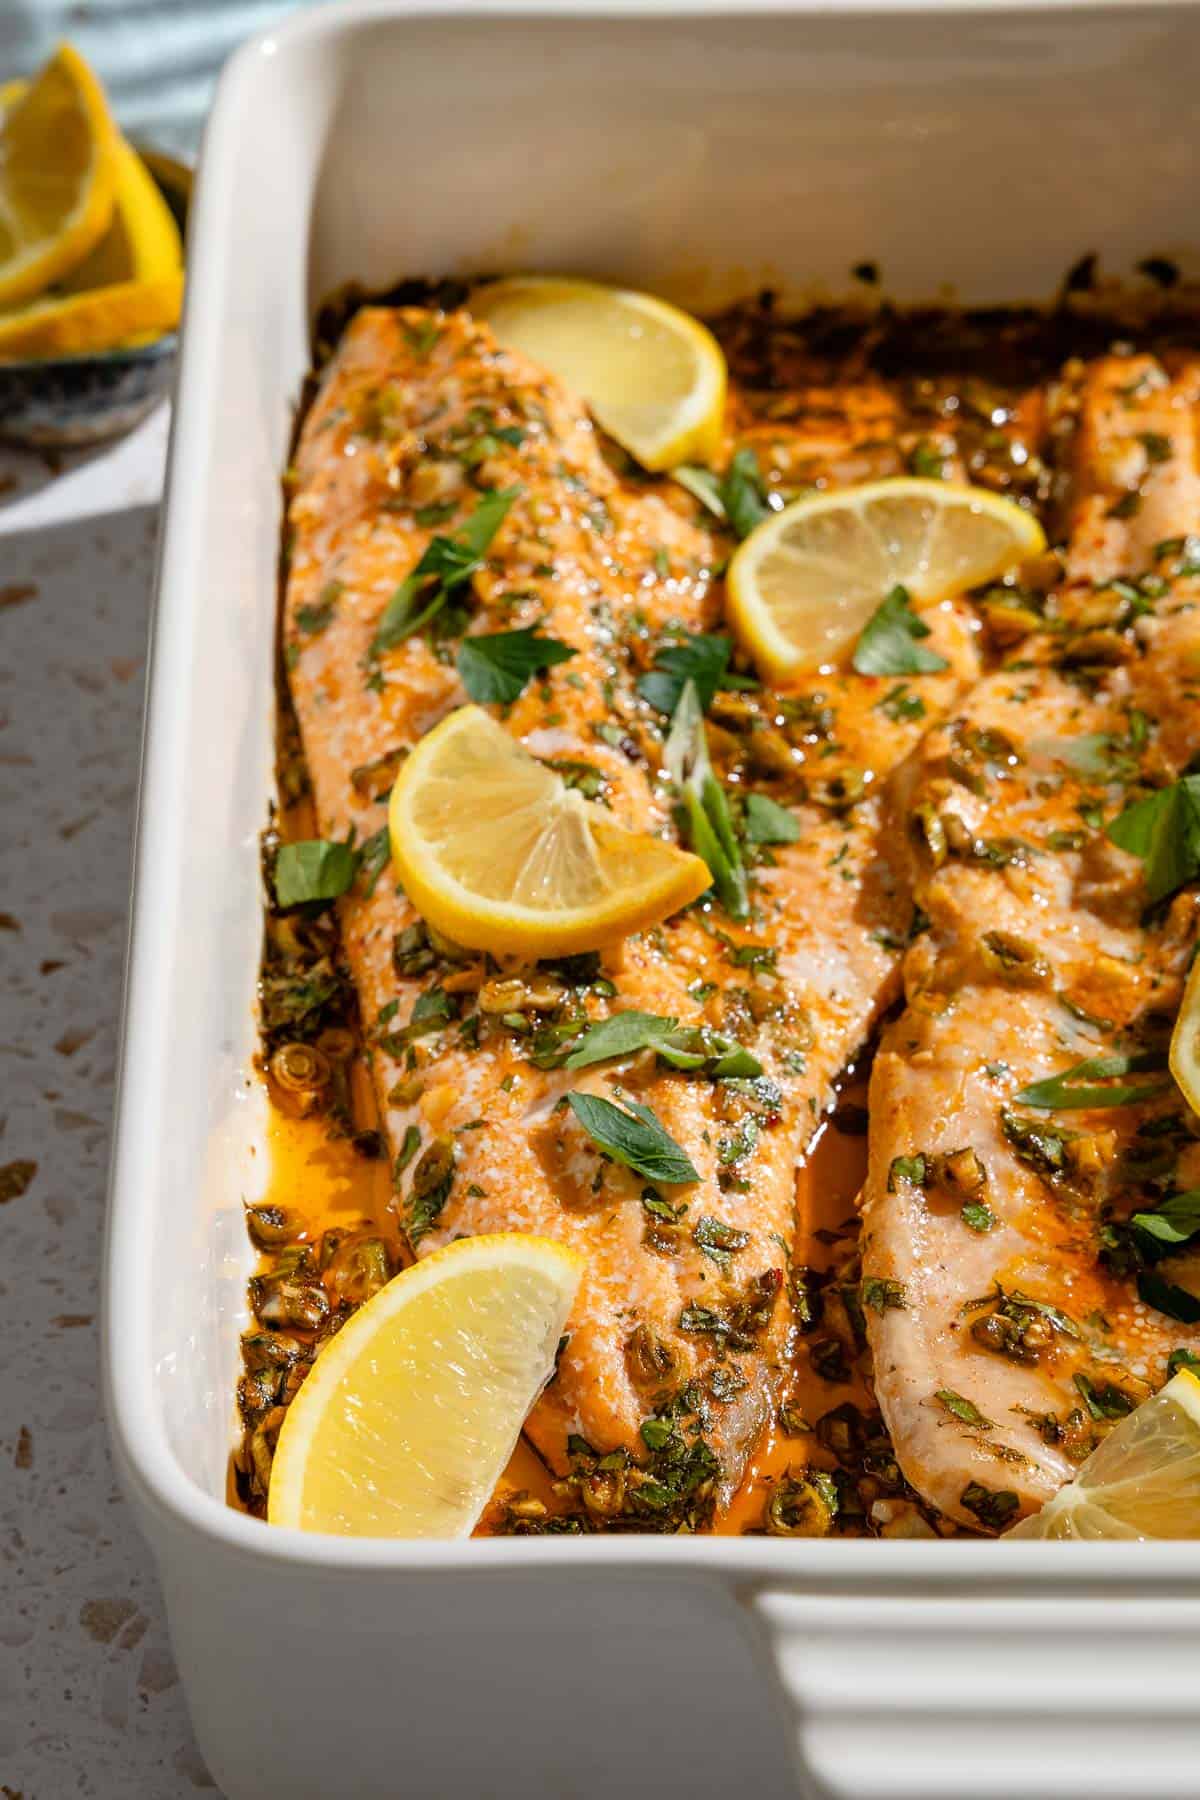 Baked Trout with Lemon, Garlic, and Fresh Herbs